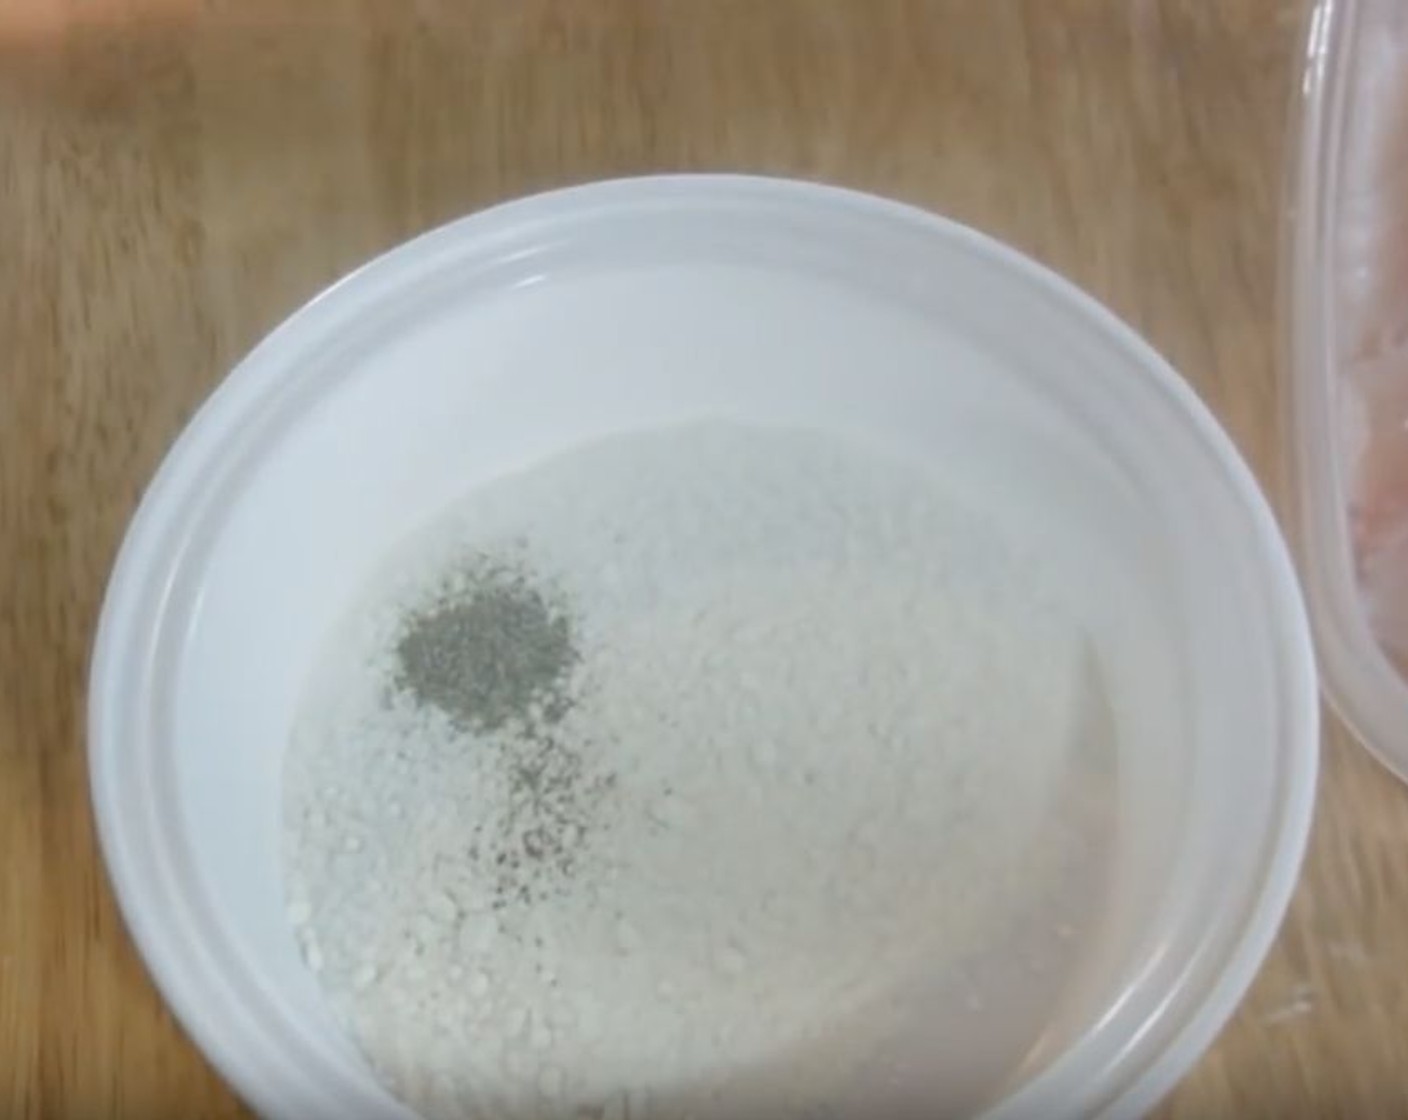 step 1 Into a mixing bowl, add the All-Purpose Flour (1/2 cup) and Ground Black Pepper (1/2 tsp). Mix to combine.